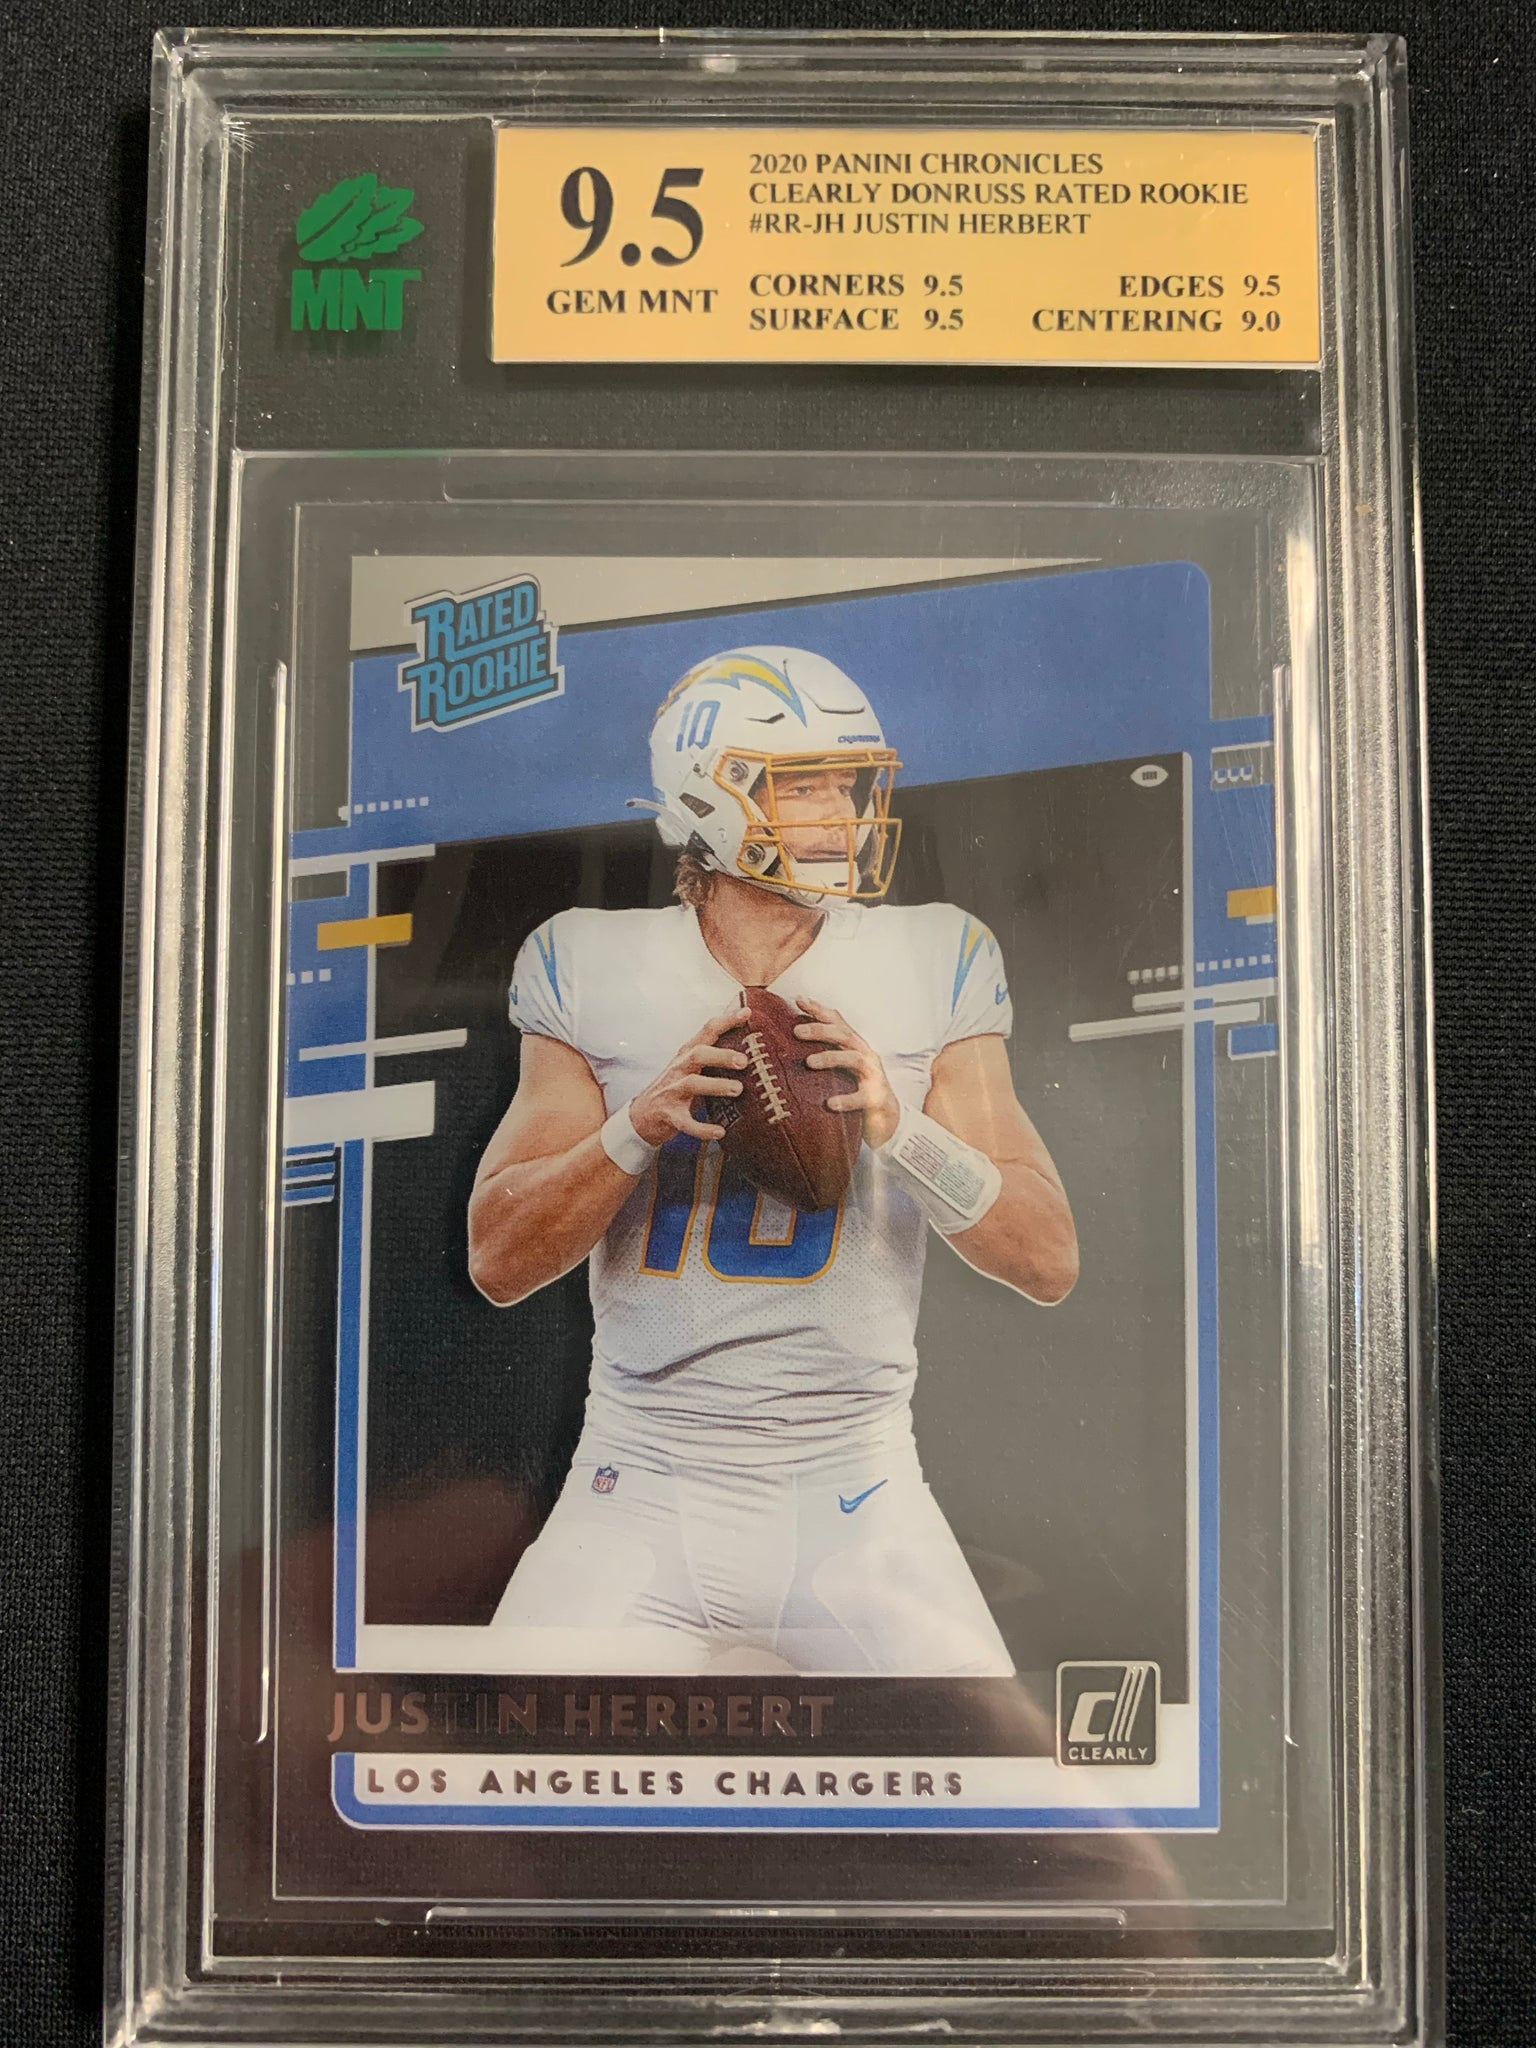 2020 PANINI CHRONICLES FOOTBALL #RR-JH LOS ANGELES CHARGERS - JUSTIN HERBERT CLEARLY DONRUSS RATED ROOKIE CARD GRADED MNT 9.5 GEM MINT